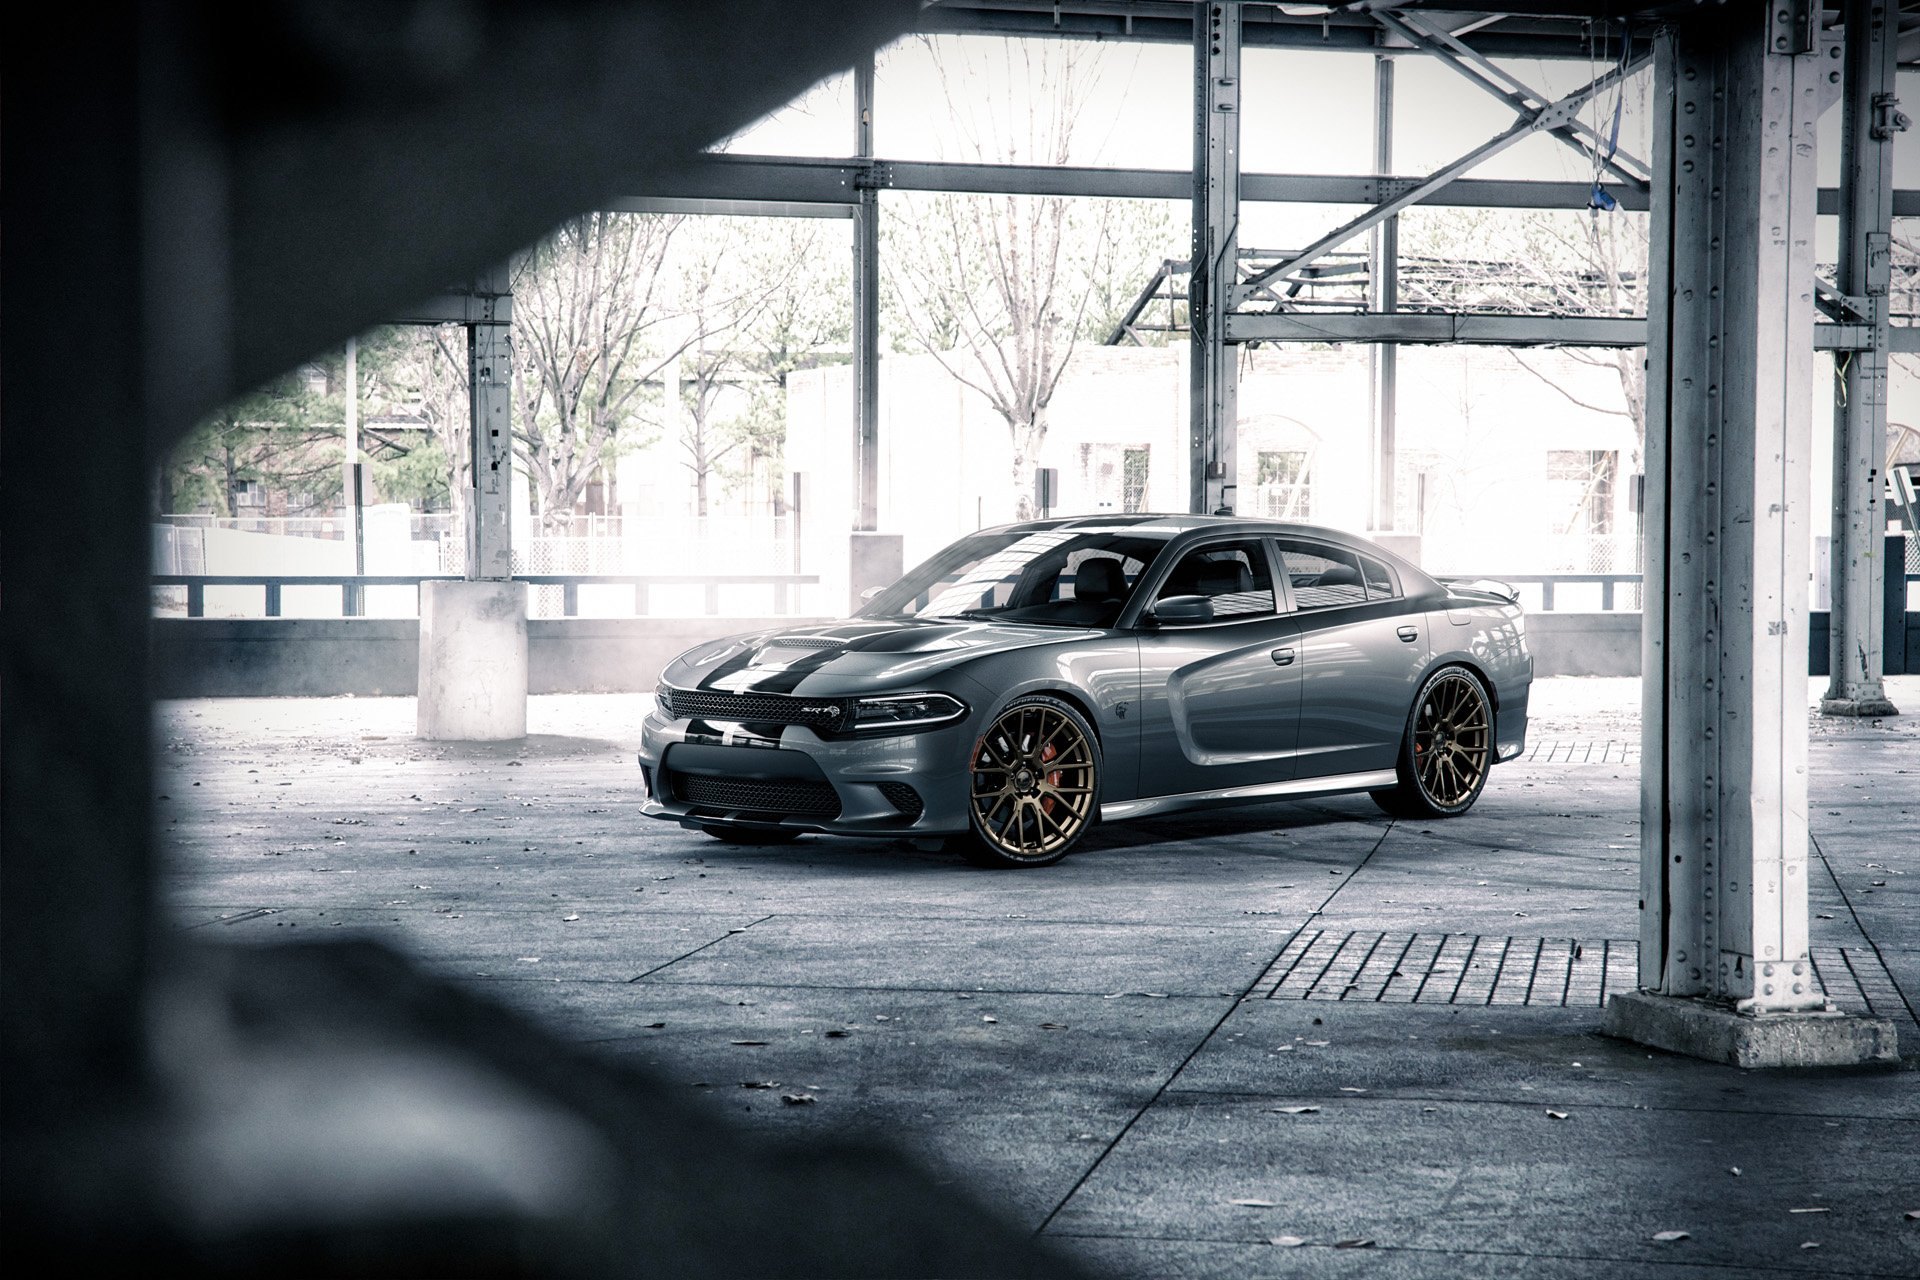 Custom Gray Dodge Charger SRT on Michelin Tires - Photo by Forgiato